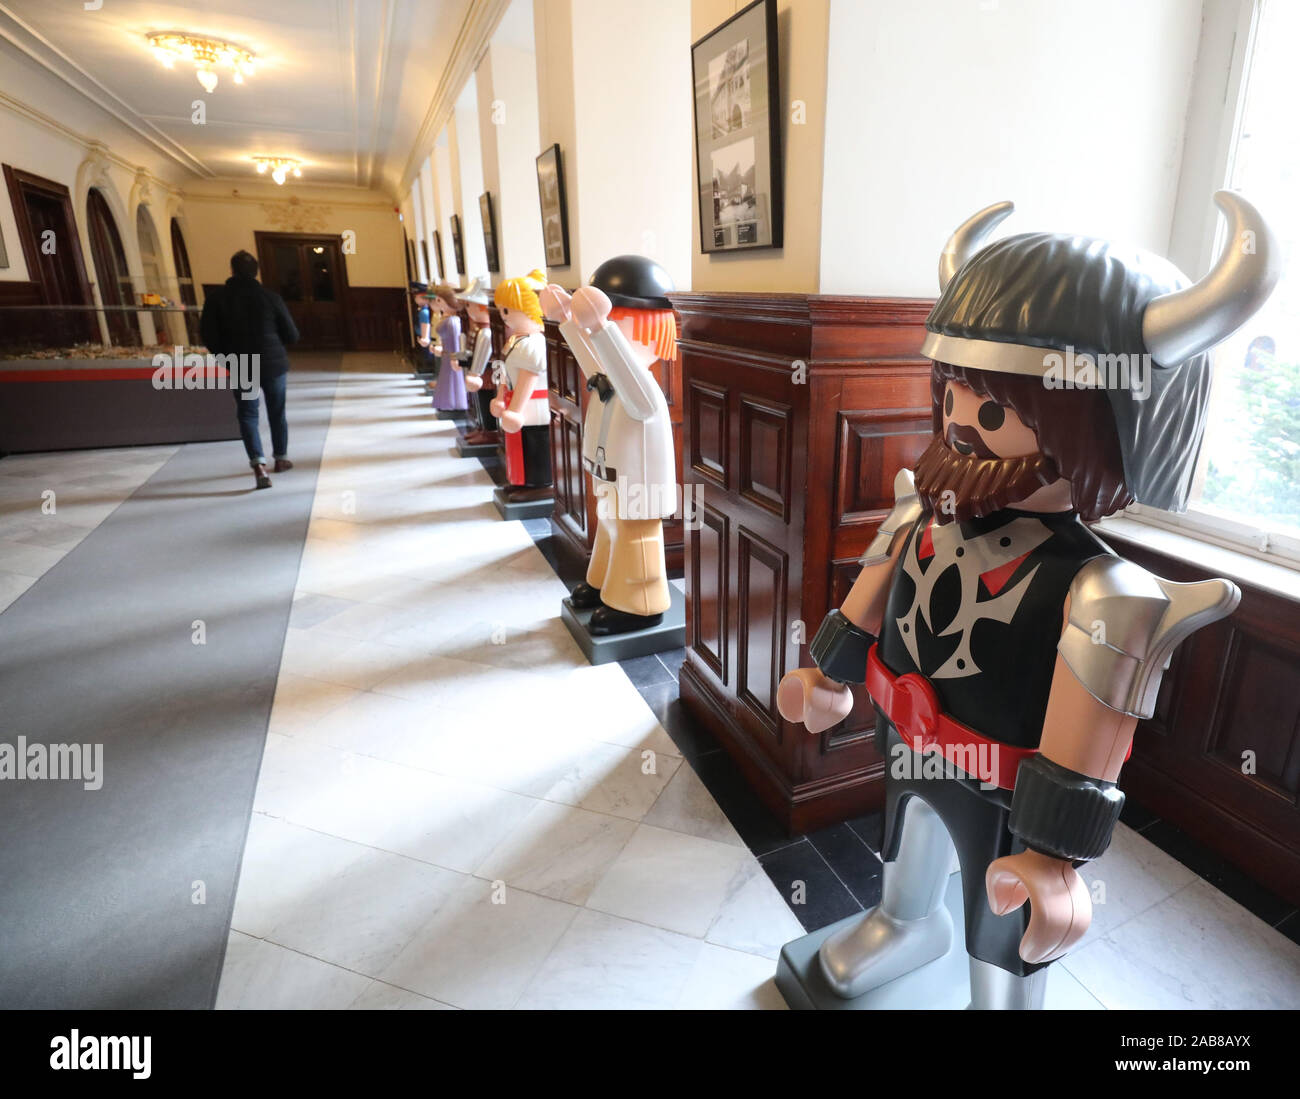 Altenburg, Germany. 26th Nov, 2019. Oversized Playmobil figures can be seen  in the exhibition Playmobil Winter Magic in the Residenzschloss  Altenburg. From 1 December to 15 March 2020, visitors can marvel at over  5000 installed figures and over